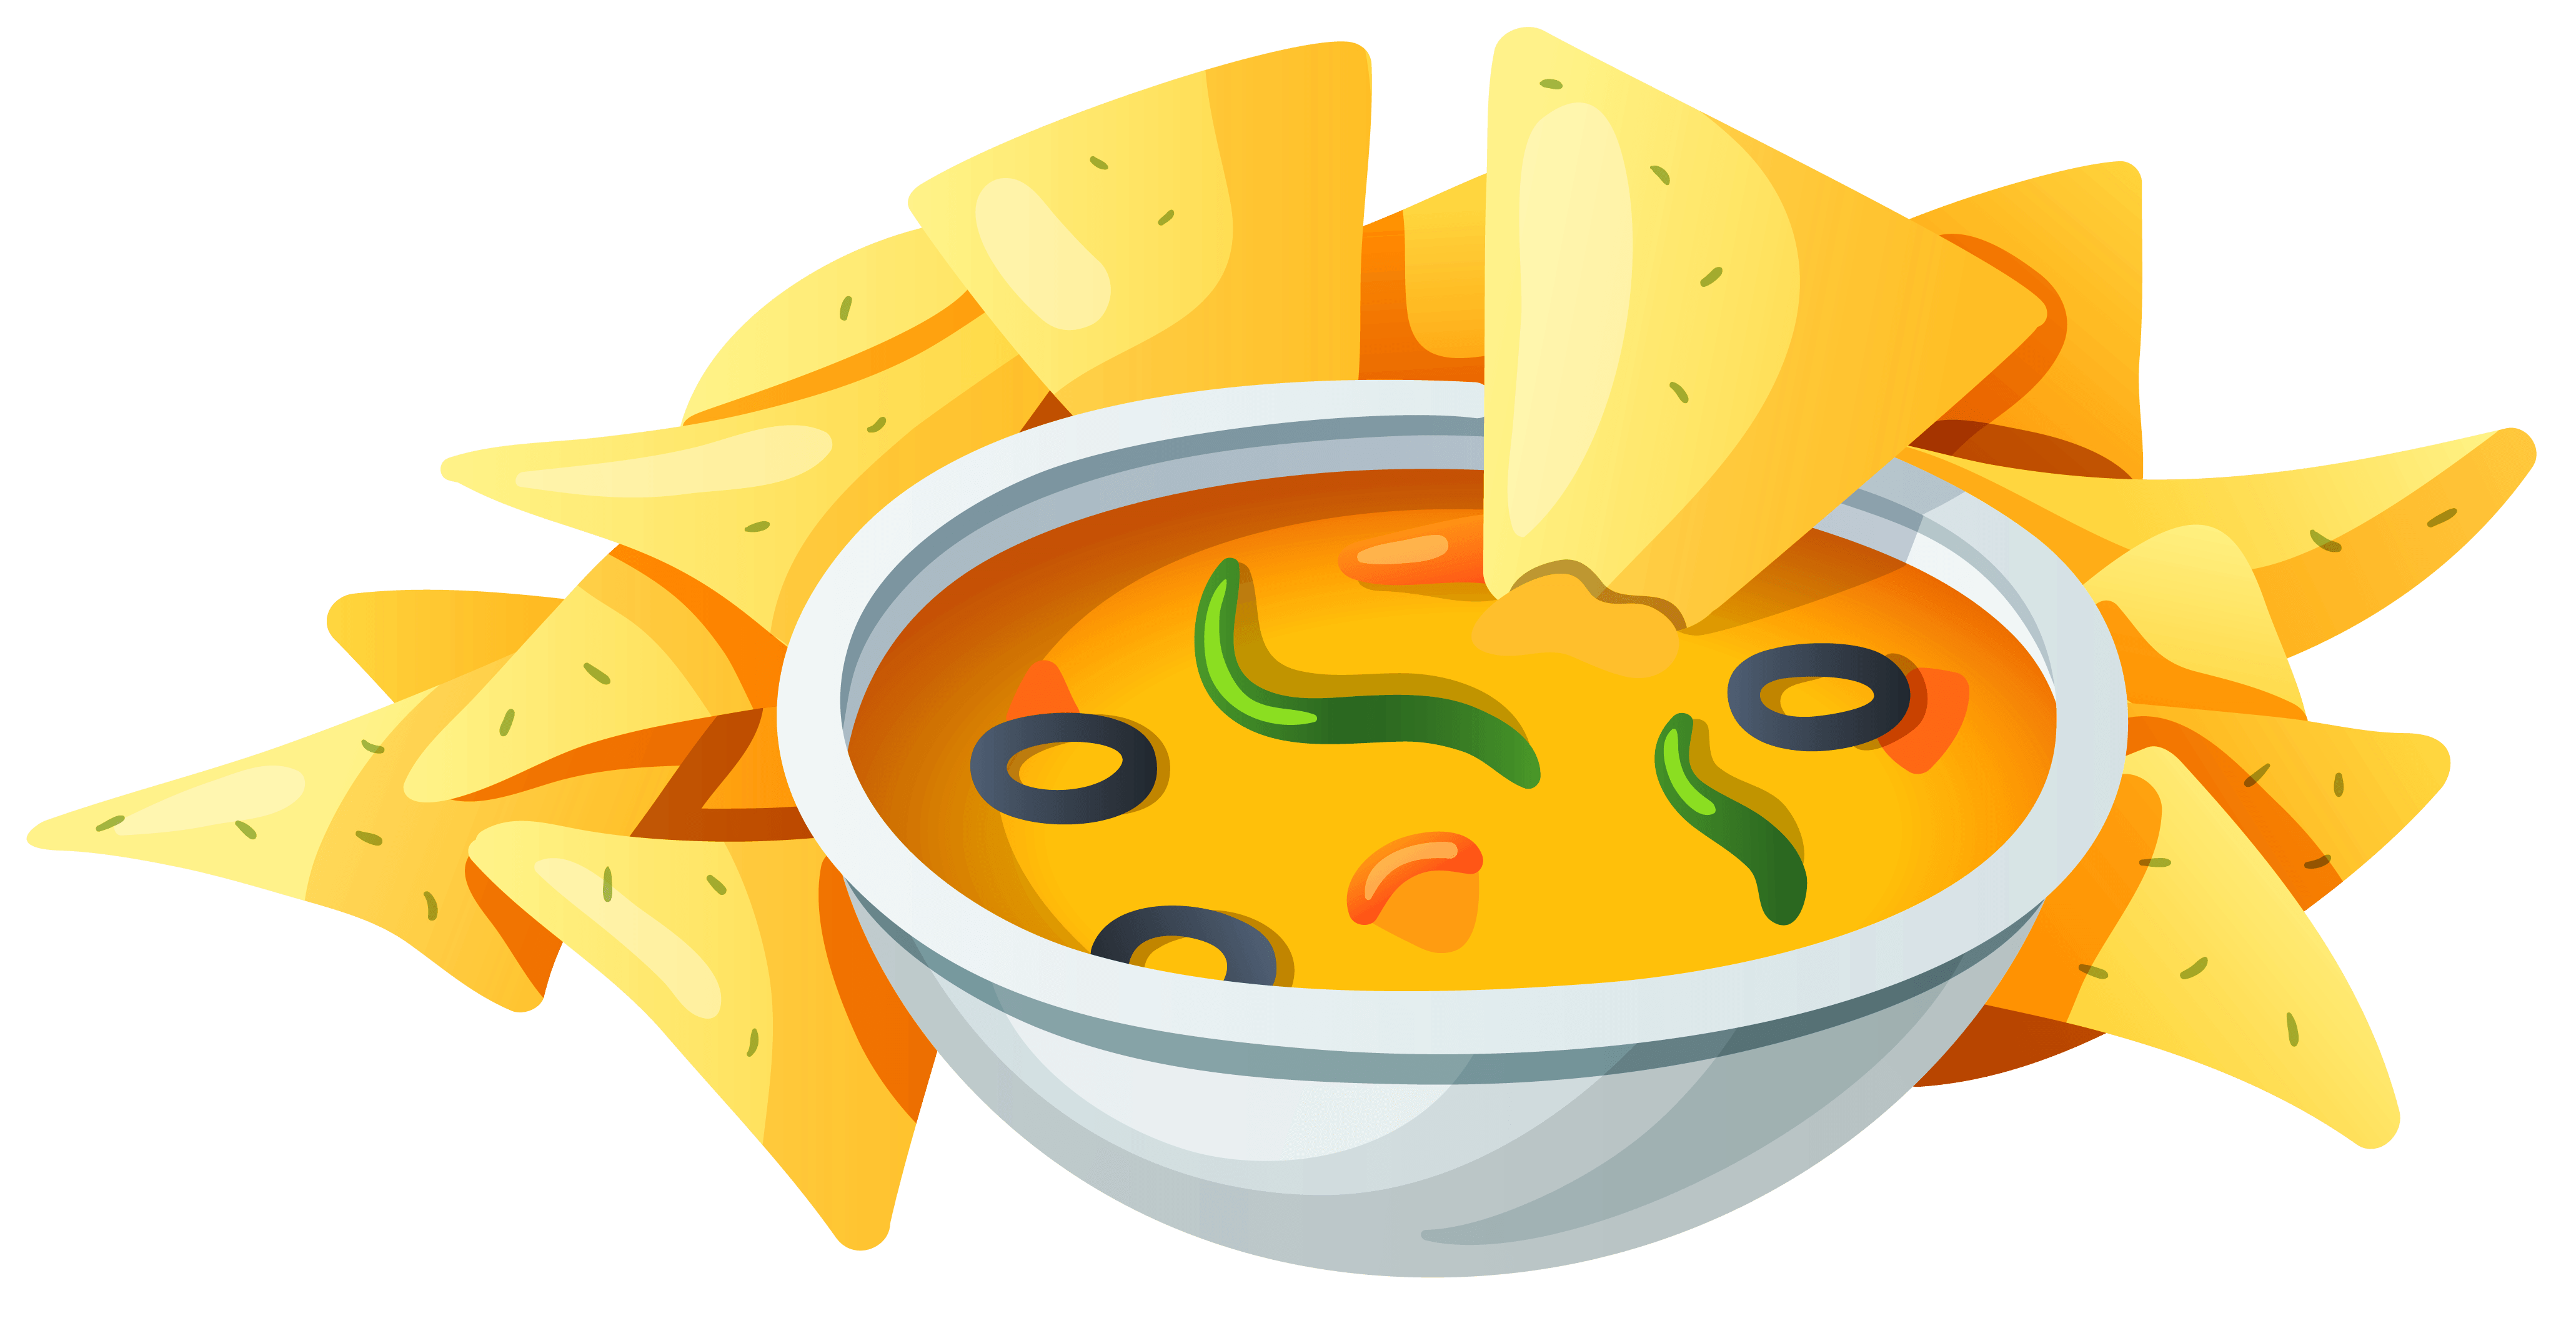 fiesta clipart lunch mexican